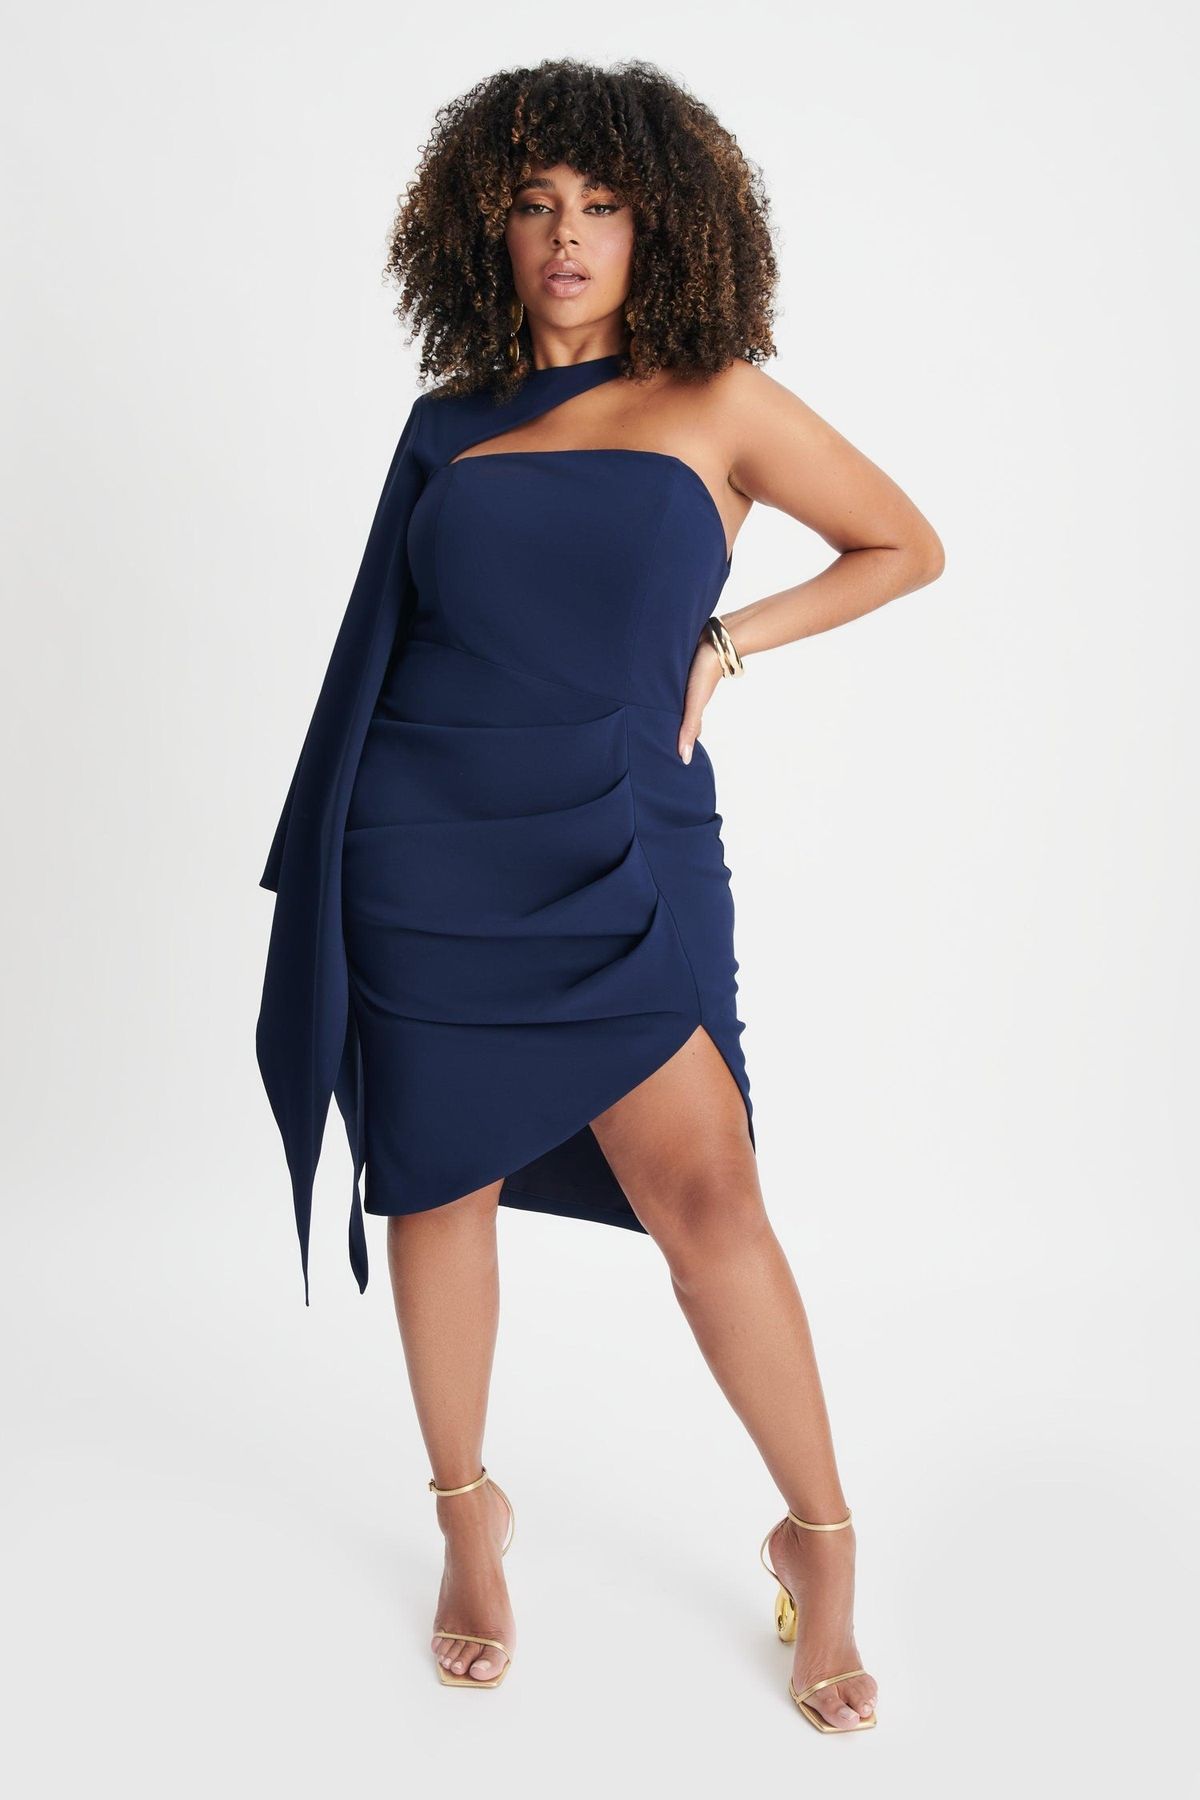 Style GIANNA Lavish Alice Plus Size 22 One Shoulder Sequined Navy Navy Cocktail Dress on Queenly